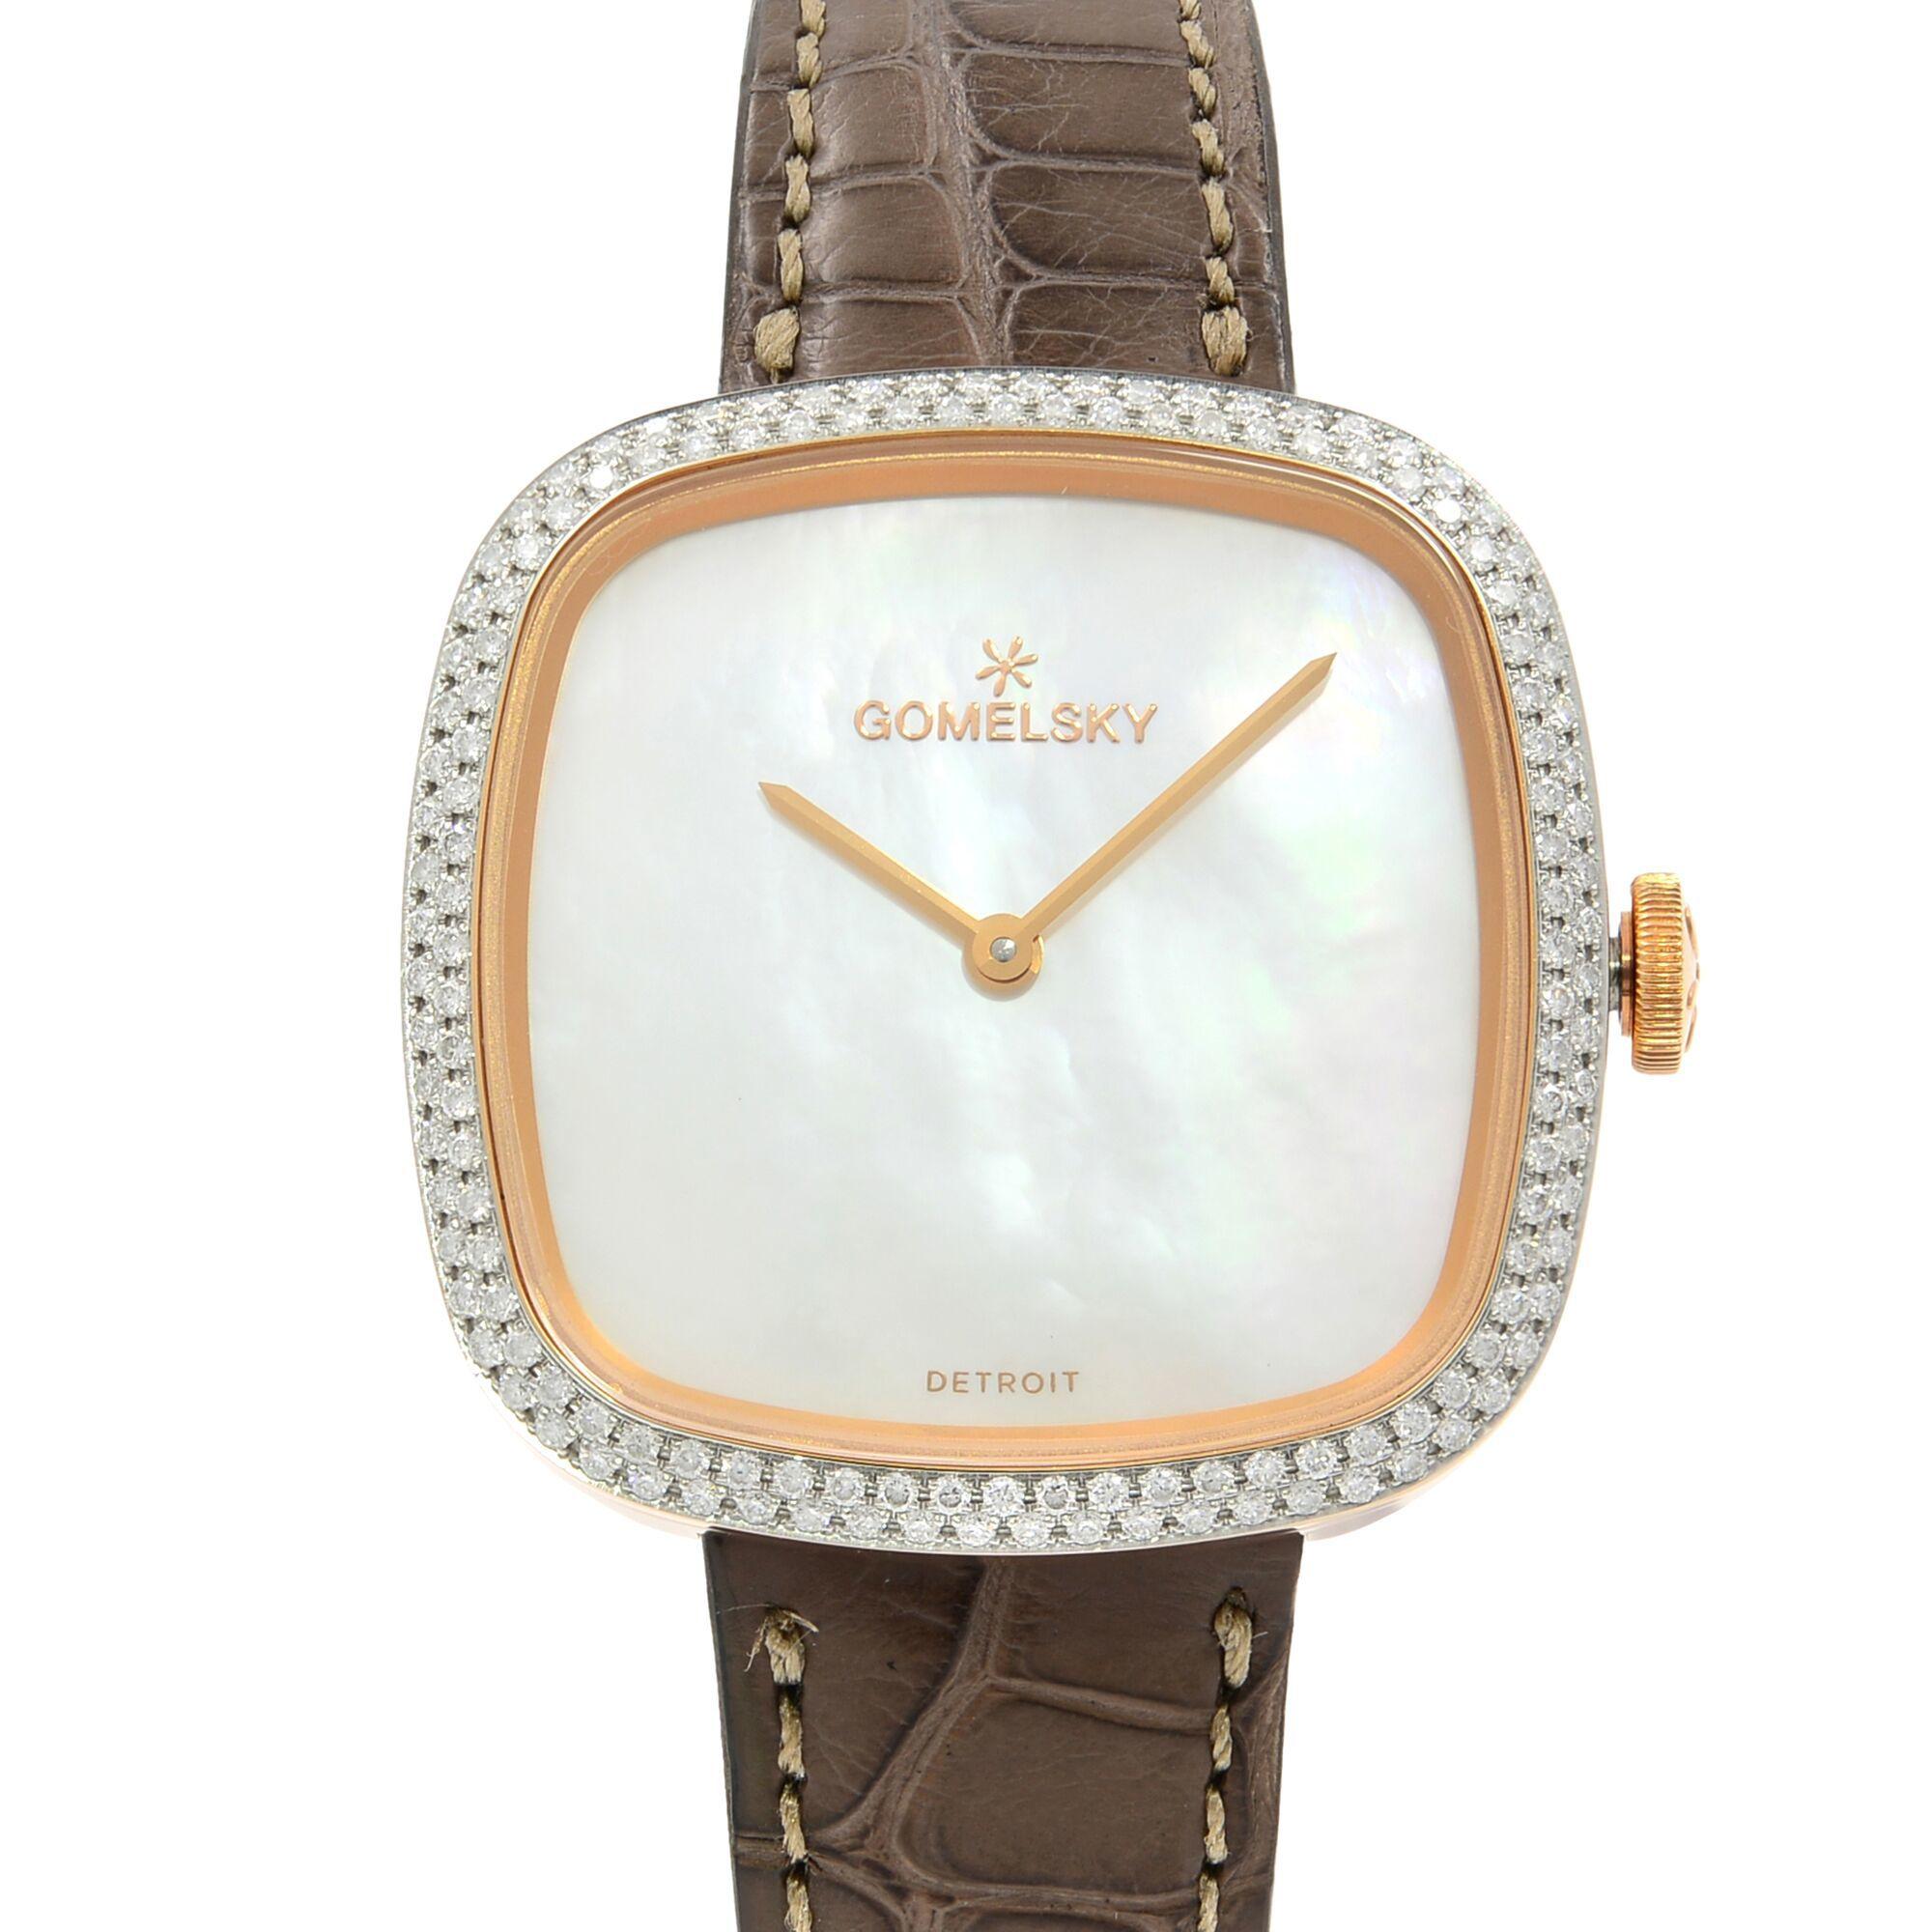 This brand new Gomelsky Eppie Sneed G0120095033 is a beautiful Ladie's timepiece that is powered by quartz (battery) movement which is cased in a stainless steel case. It has a square shape face,  dial and has hand unspecified style markers. It is